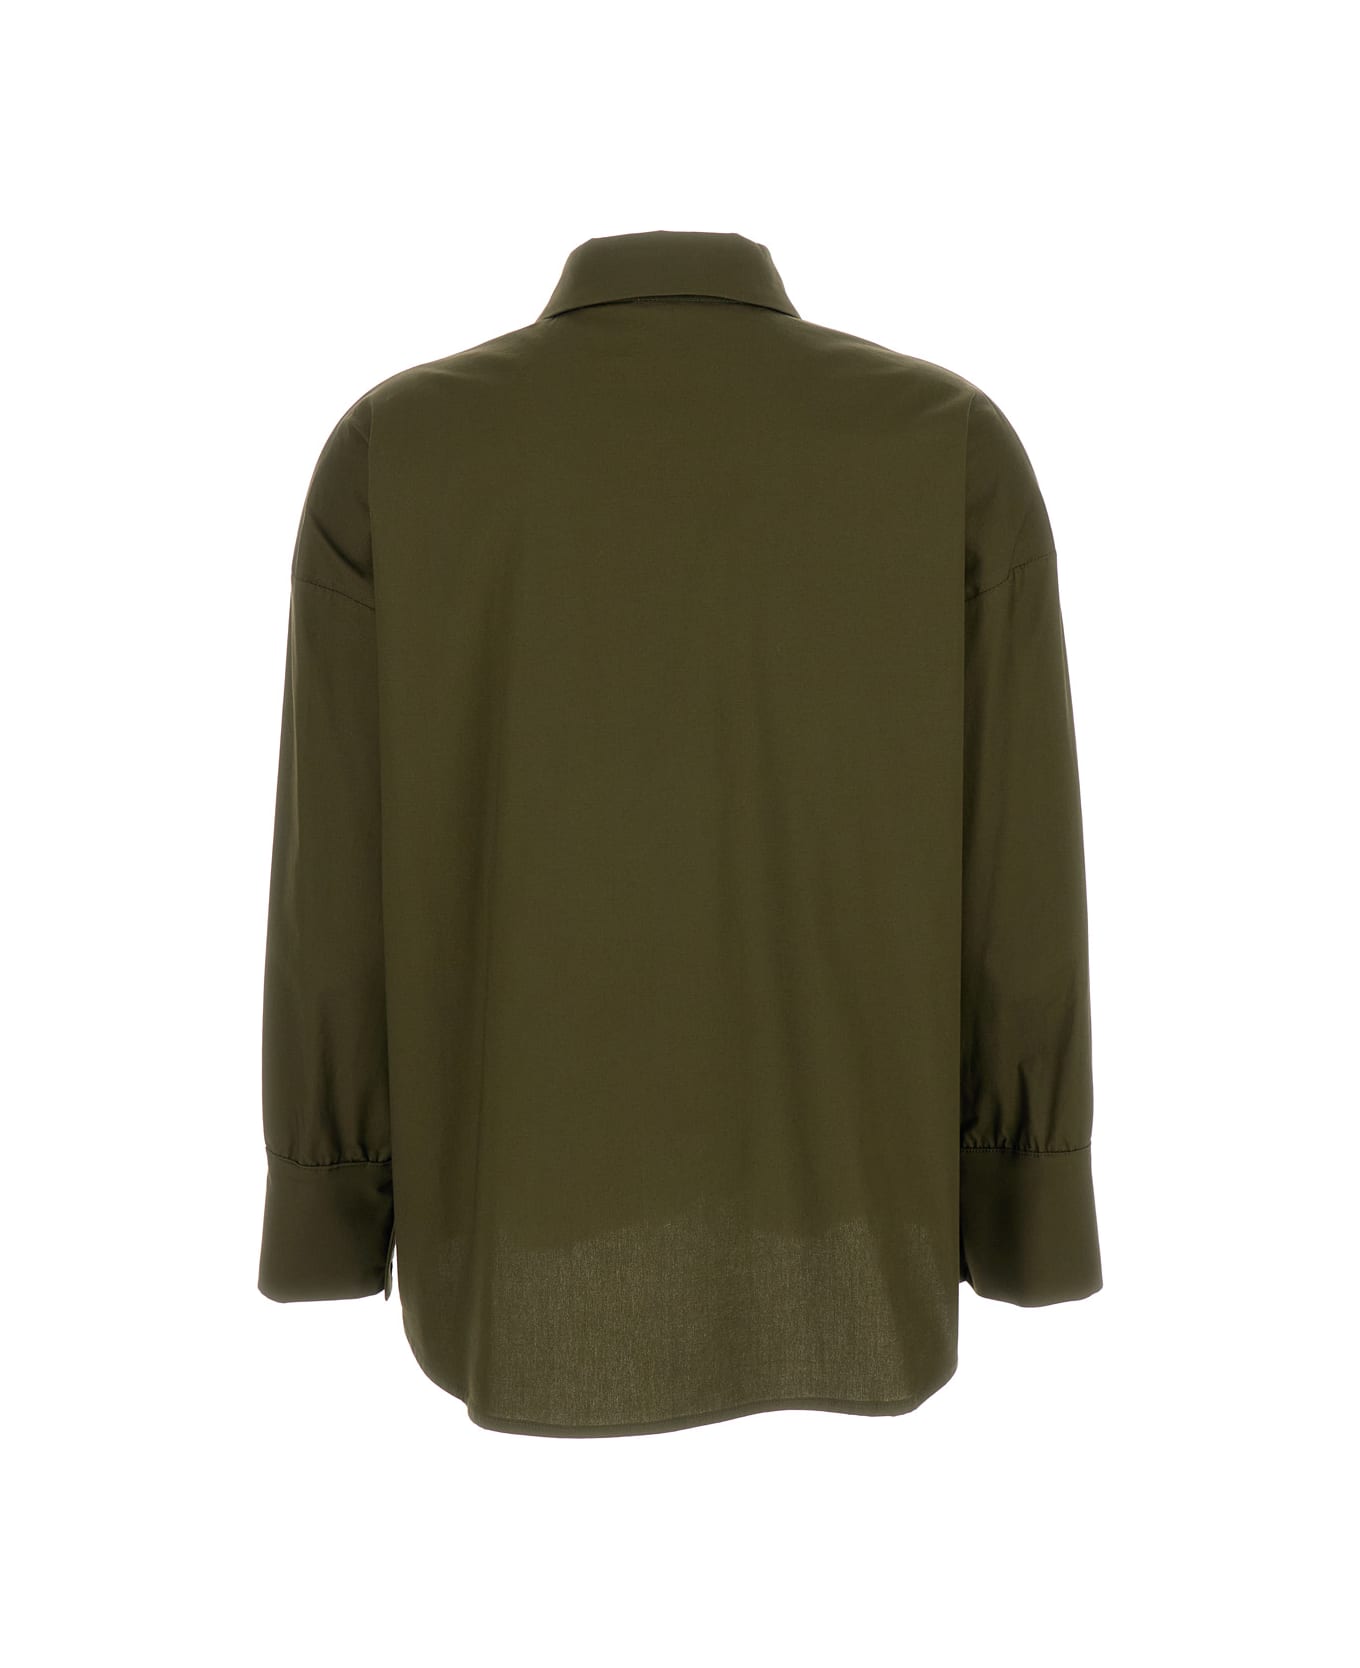 Federica Tosi Military Green Long Sleeves Shirt In Cotton Blend Woman - Green シャツ